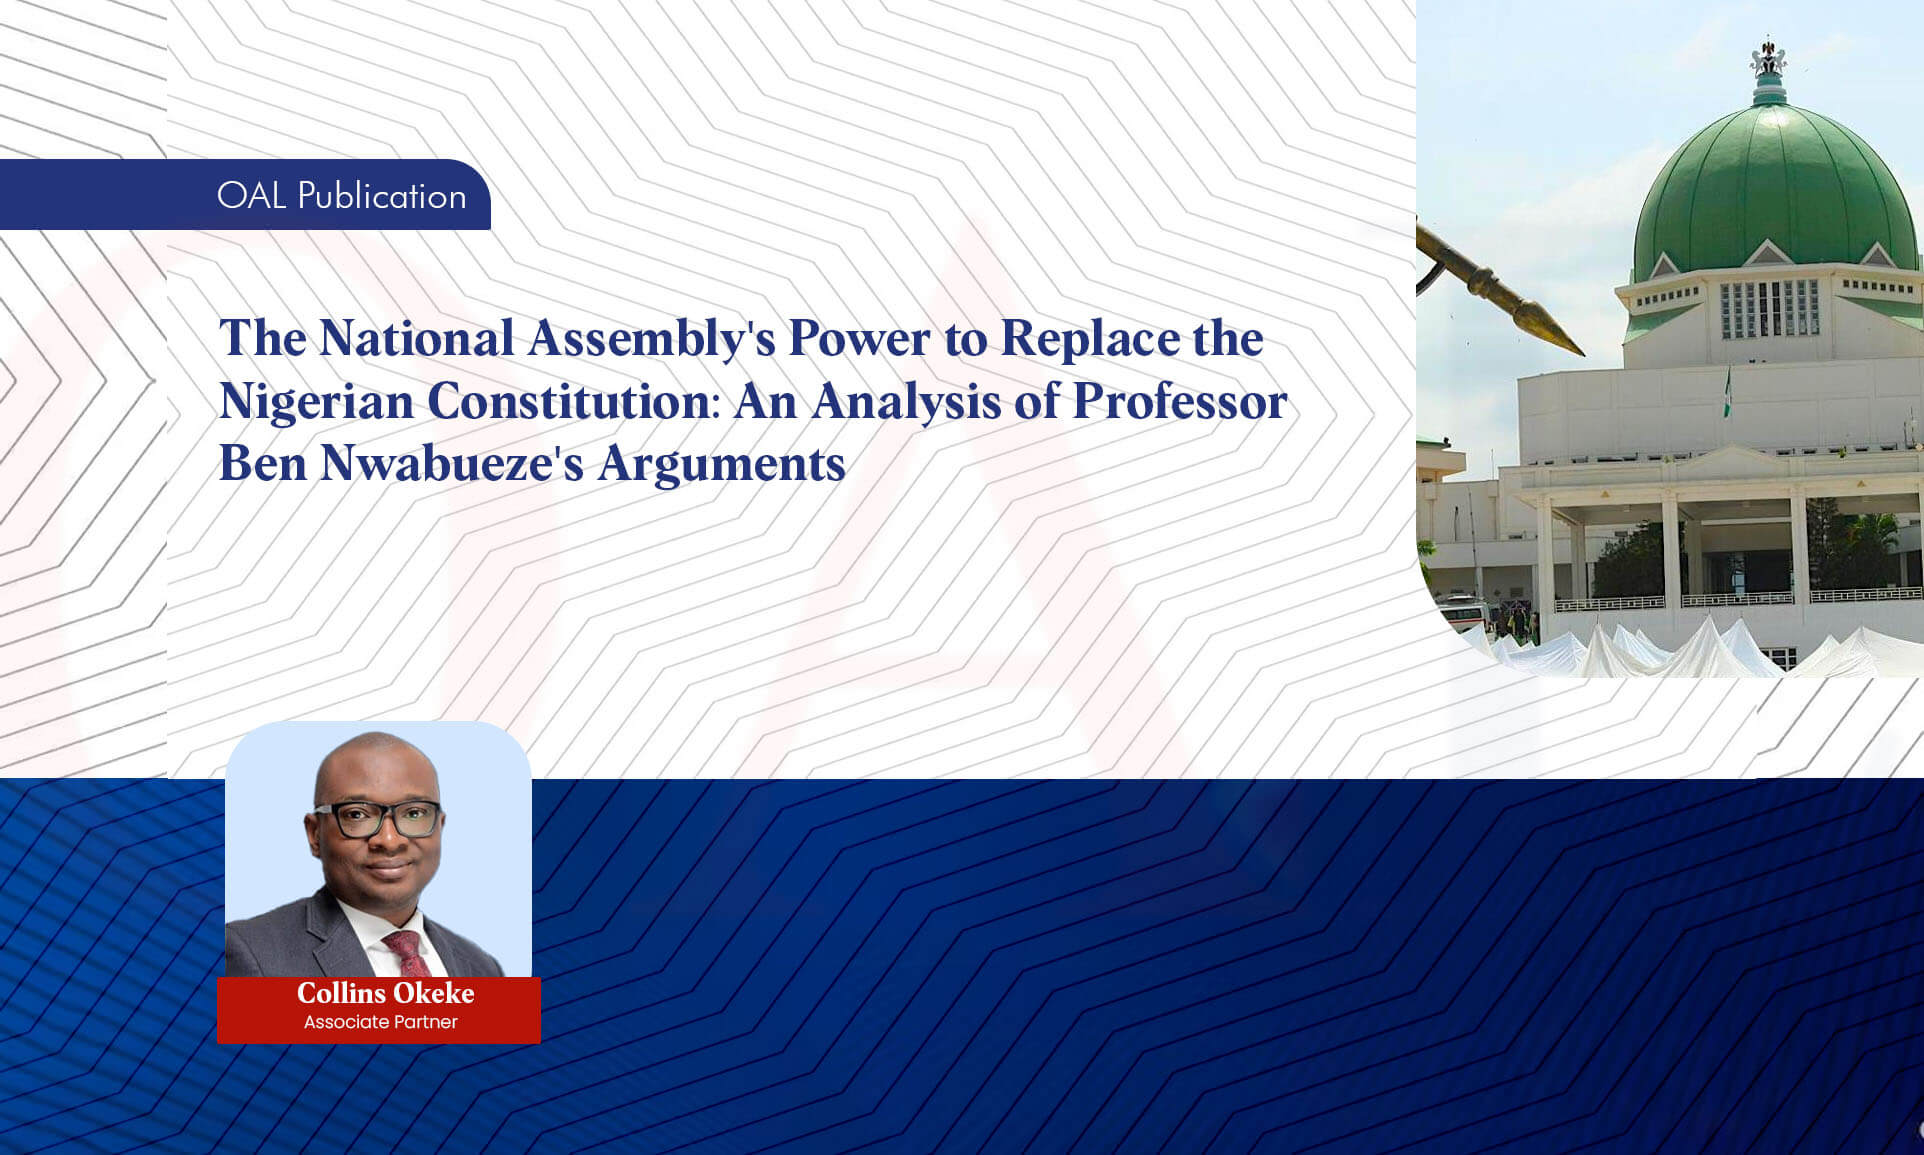 The National Assembly's Power to Replace the Nigerian Constitution: An Analysis of Professor Ben Nwabueze's Arguments